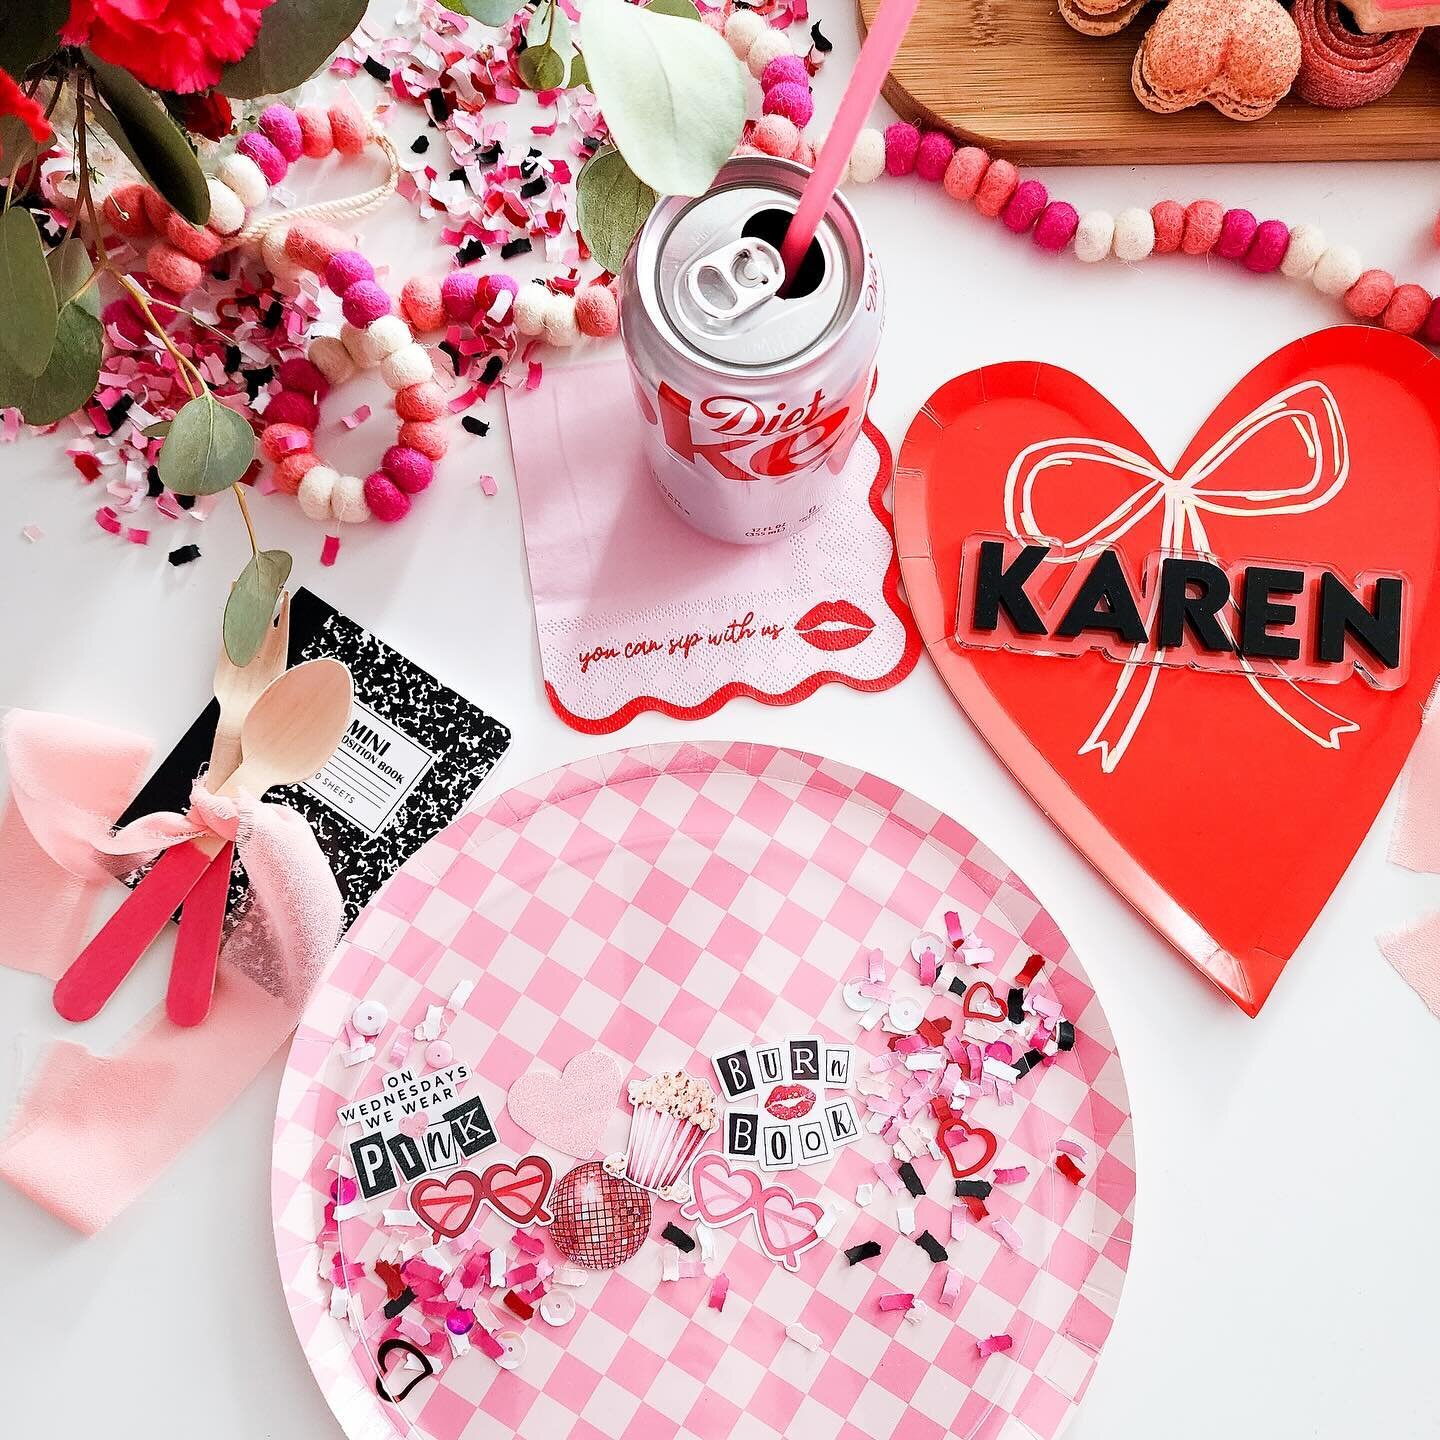 𝗢𝗻 𝗪𝗲𝗱𝗻𝗲𝘀𝗱𝗮𝘆𝘀 𝗪𝗲 𝗪𝗲𝗮𝗿 𝗣𝗶𝗻𝗸! 💗 This Mean Girls Party from @sophiemorganjones is So Fetch. This confetti mix was created exclusively for this outstanding party Sophie put together and it&rsquo;s now available in my shop. 𝘚𝘵𝘢𝘺